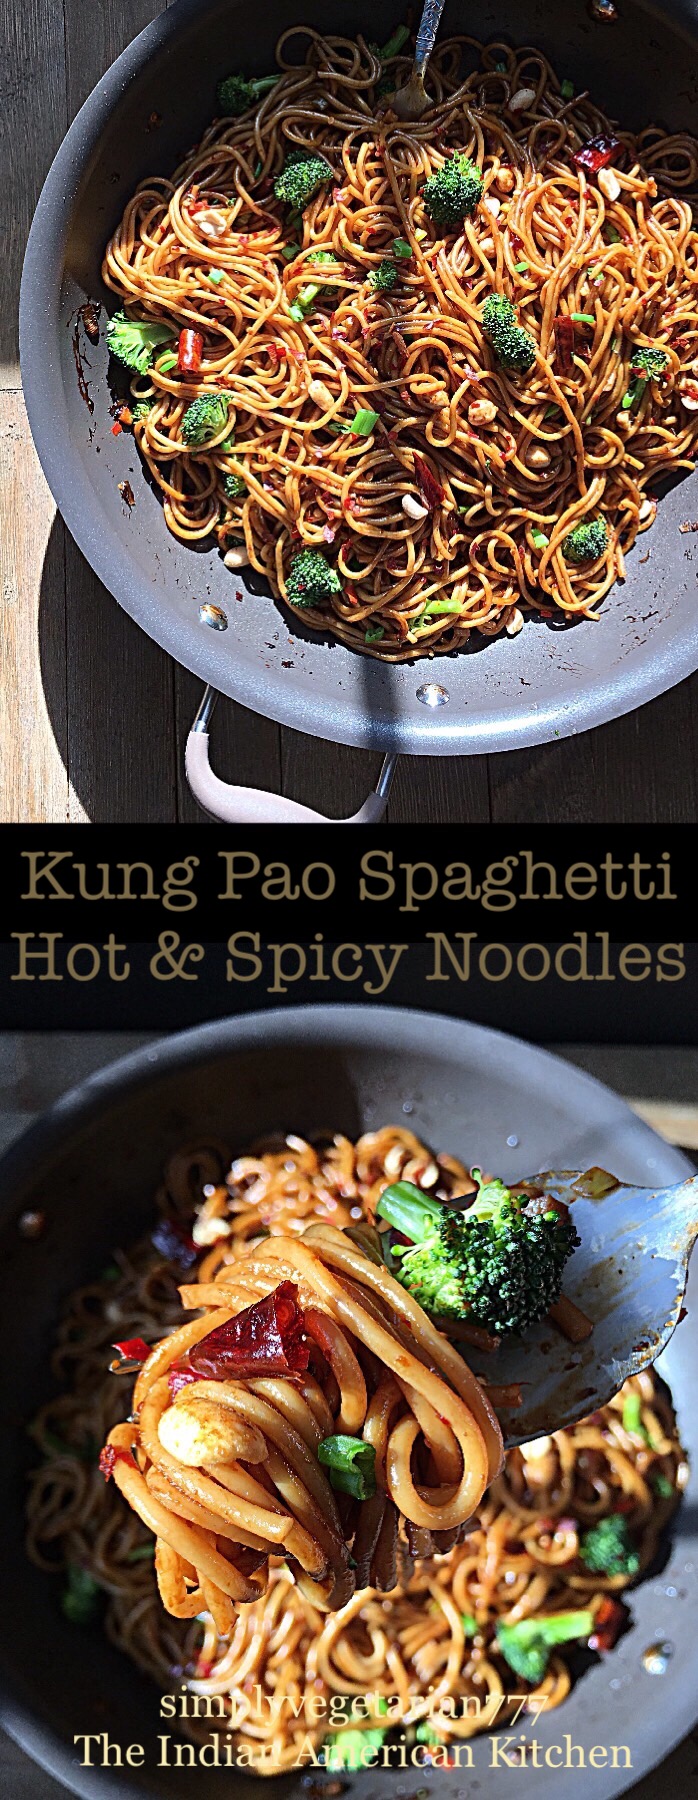 Kung Pao Spaghetti Hot Spicy Noodles is the perfect recipe that is easy, simple and oh-so delicious. It is made using Spaghetti with Asian flavors of spicy kung pao. A perfect Vegetarian Chinese Take Out can now be enjoyed at home. #vegetarianasianrecipes #kungpao #copycatCPKspaghetti #spicynoodles #spicyspaghetti #chinesetakeoutrecipes